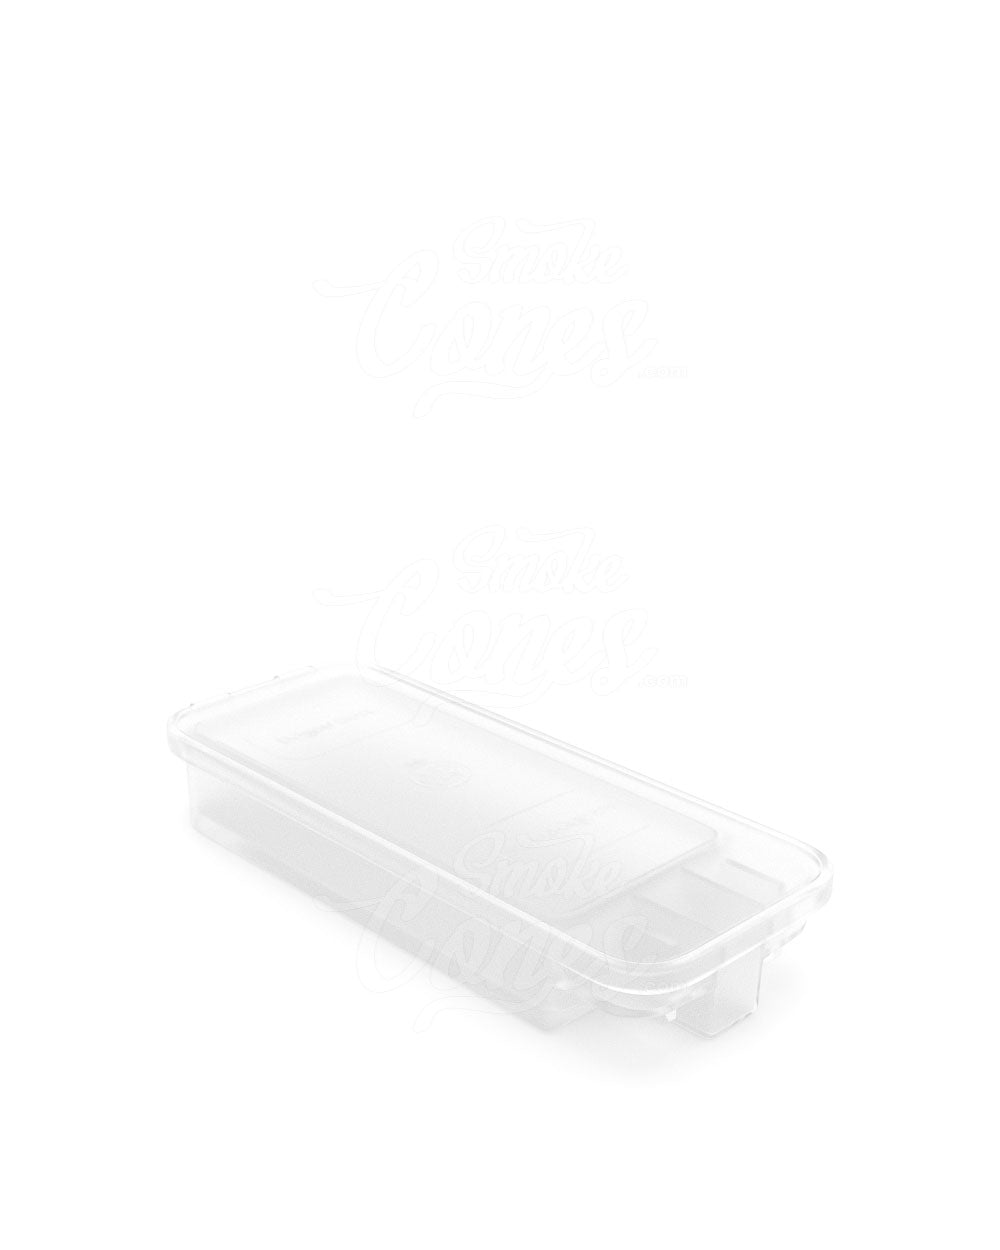 70mm Pollen Gear Clear SnapTech Child Resistant Edible & Pre-Roll Small Joint Case 240/Box - 4